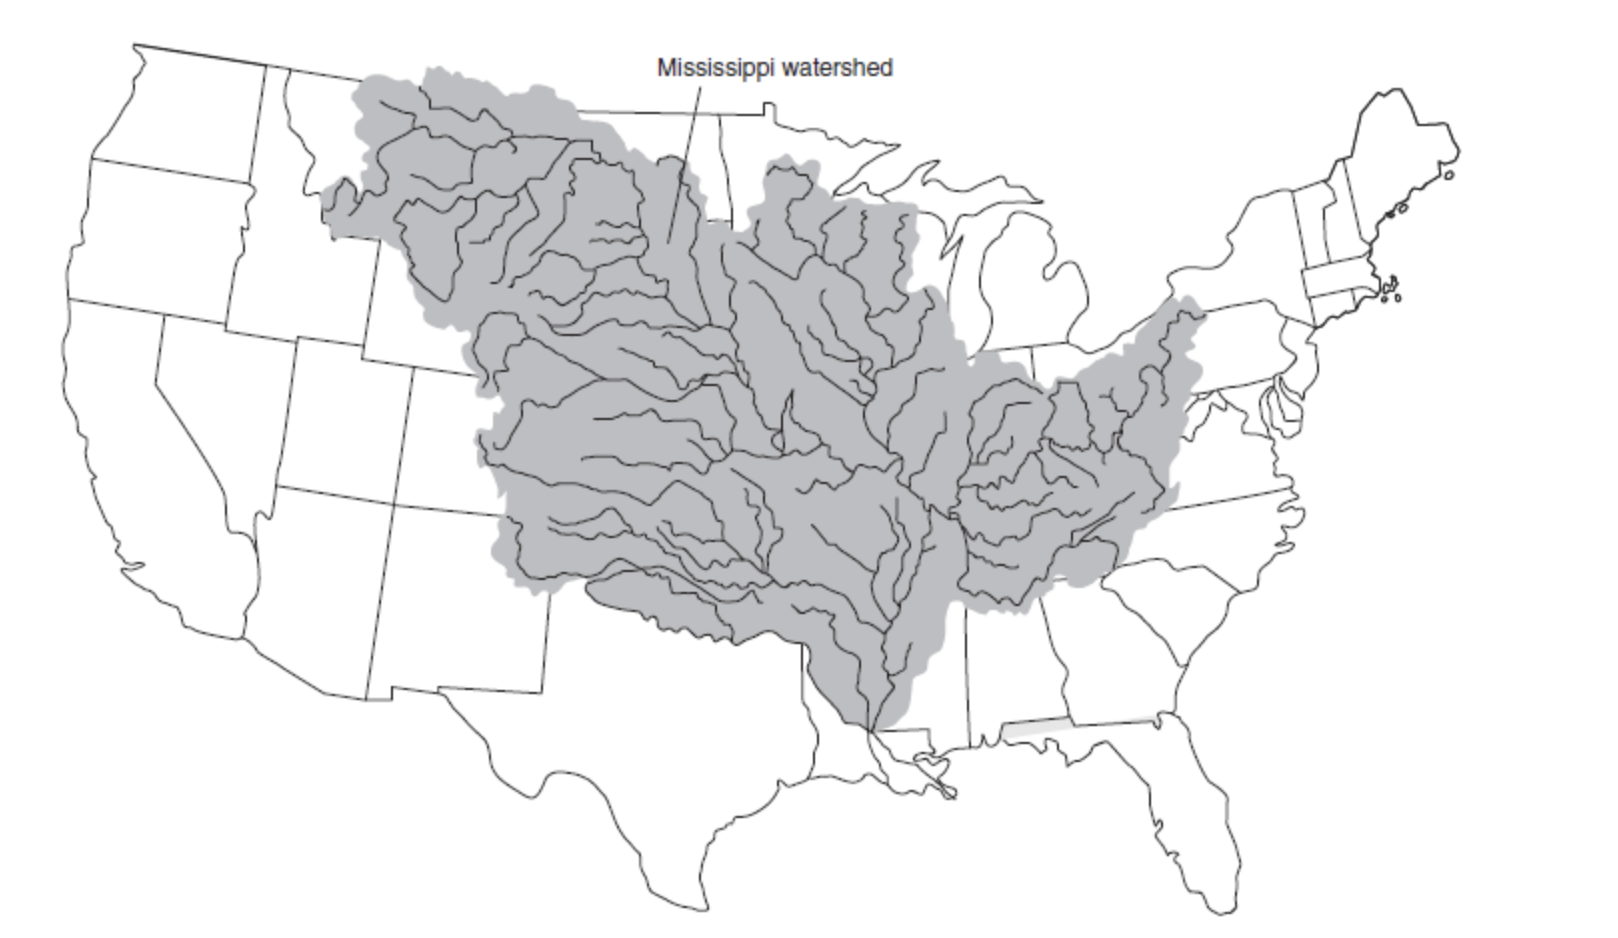 Figure 12.1 Mississippi watershed.